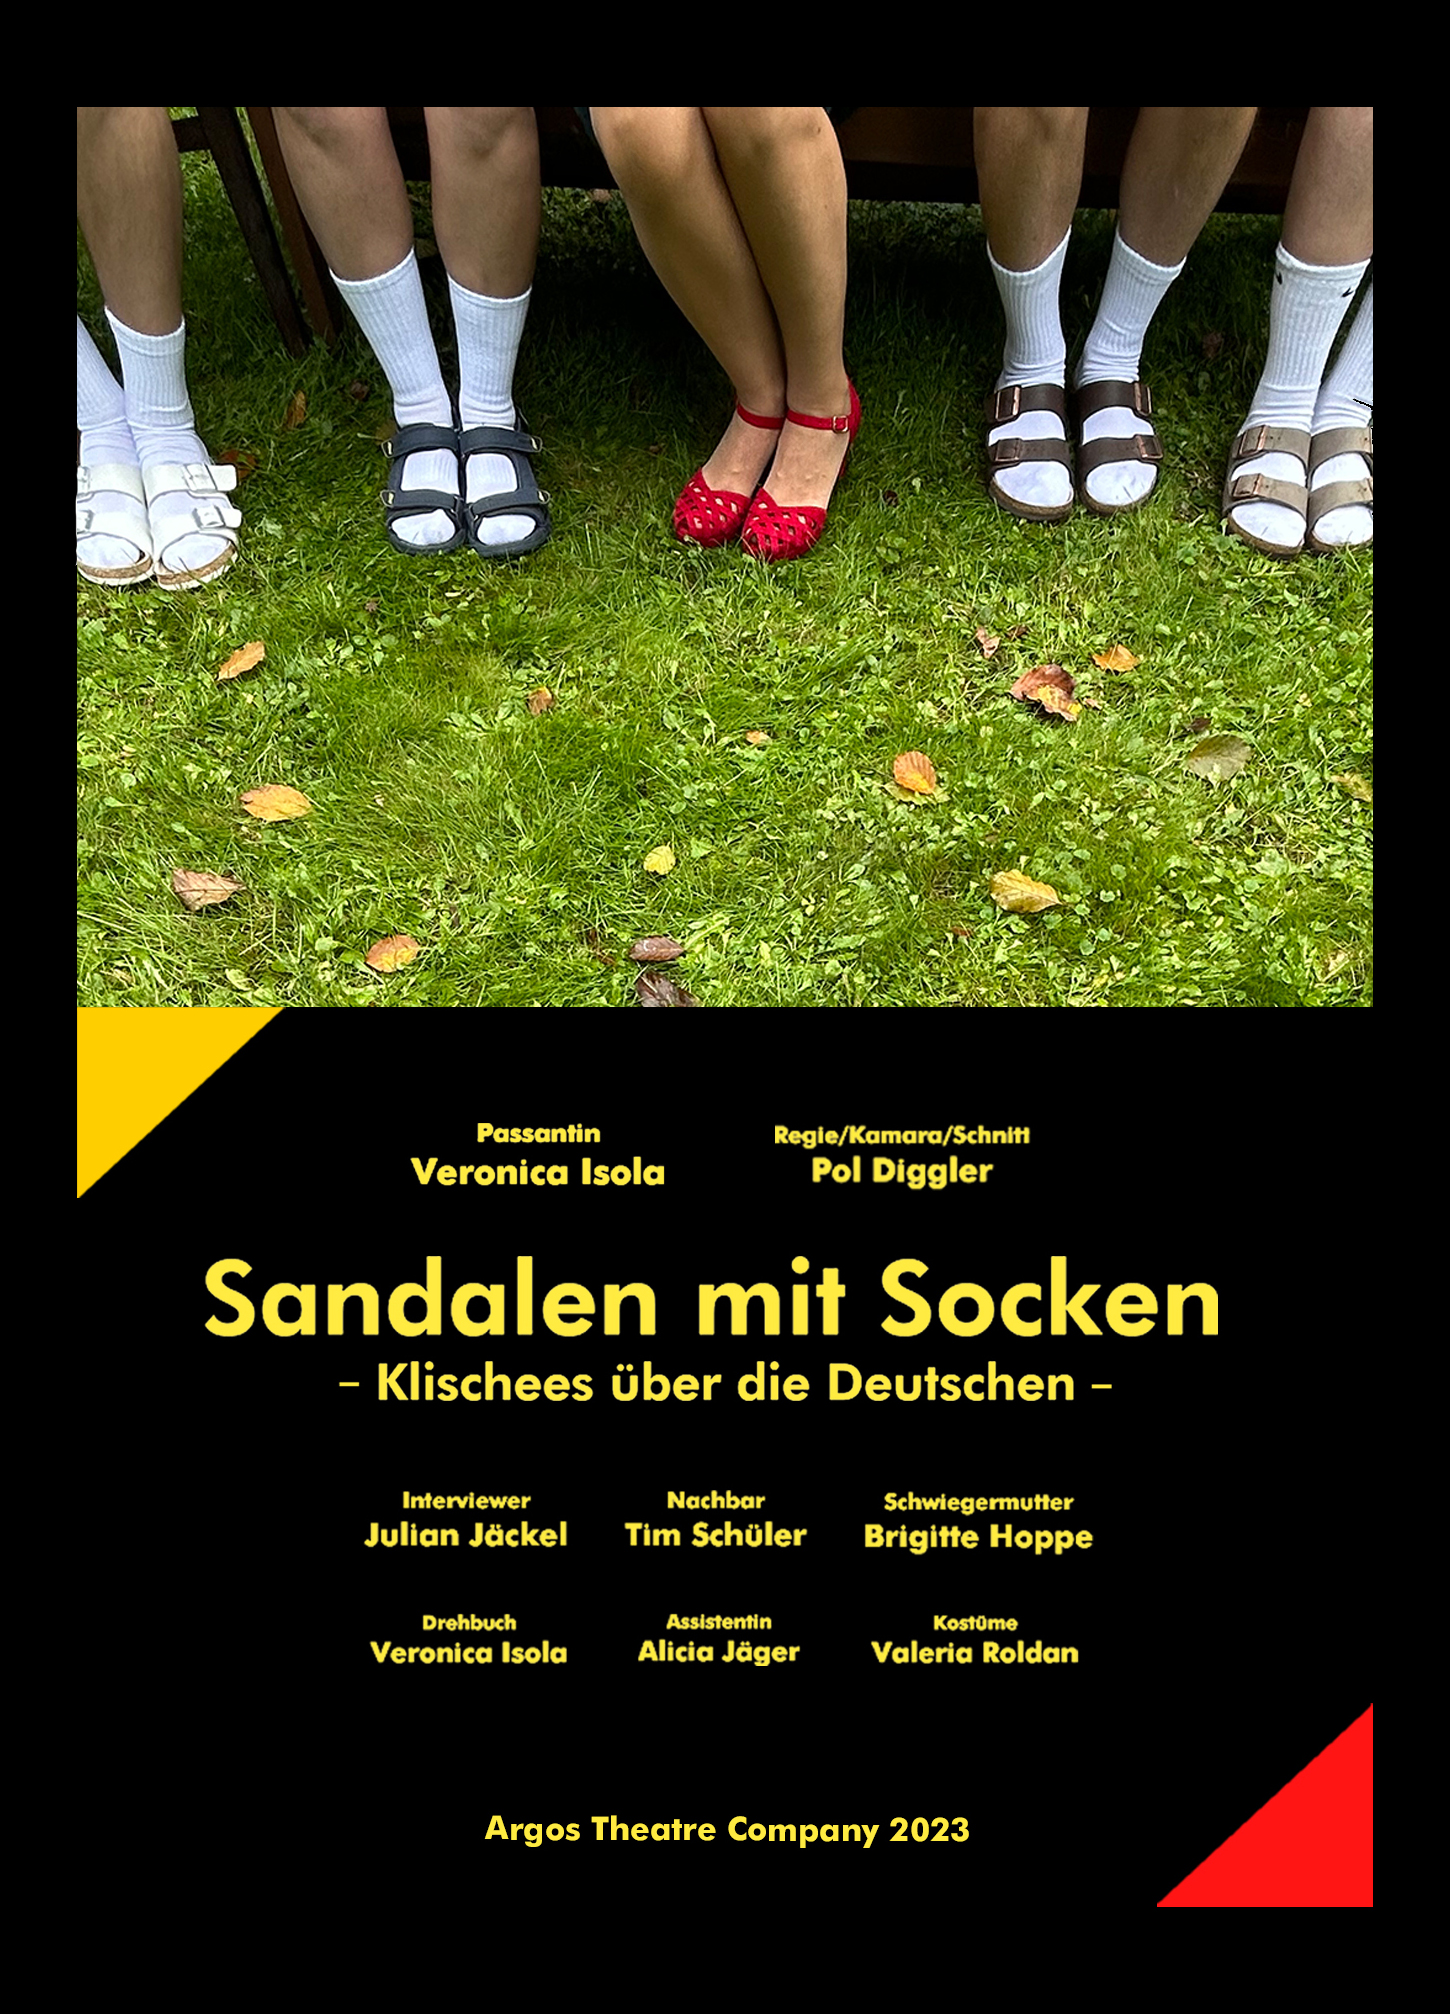 Sandals with socks – Cliches about Germans –